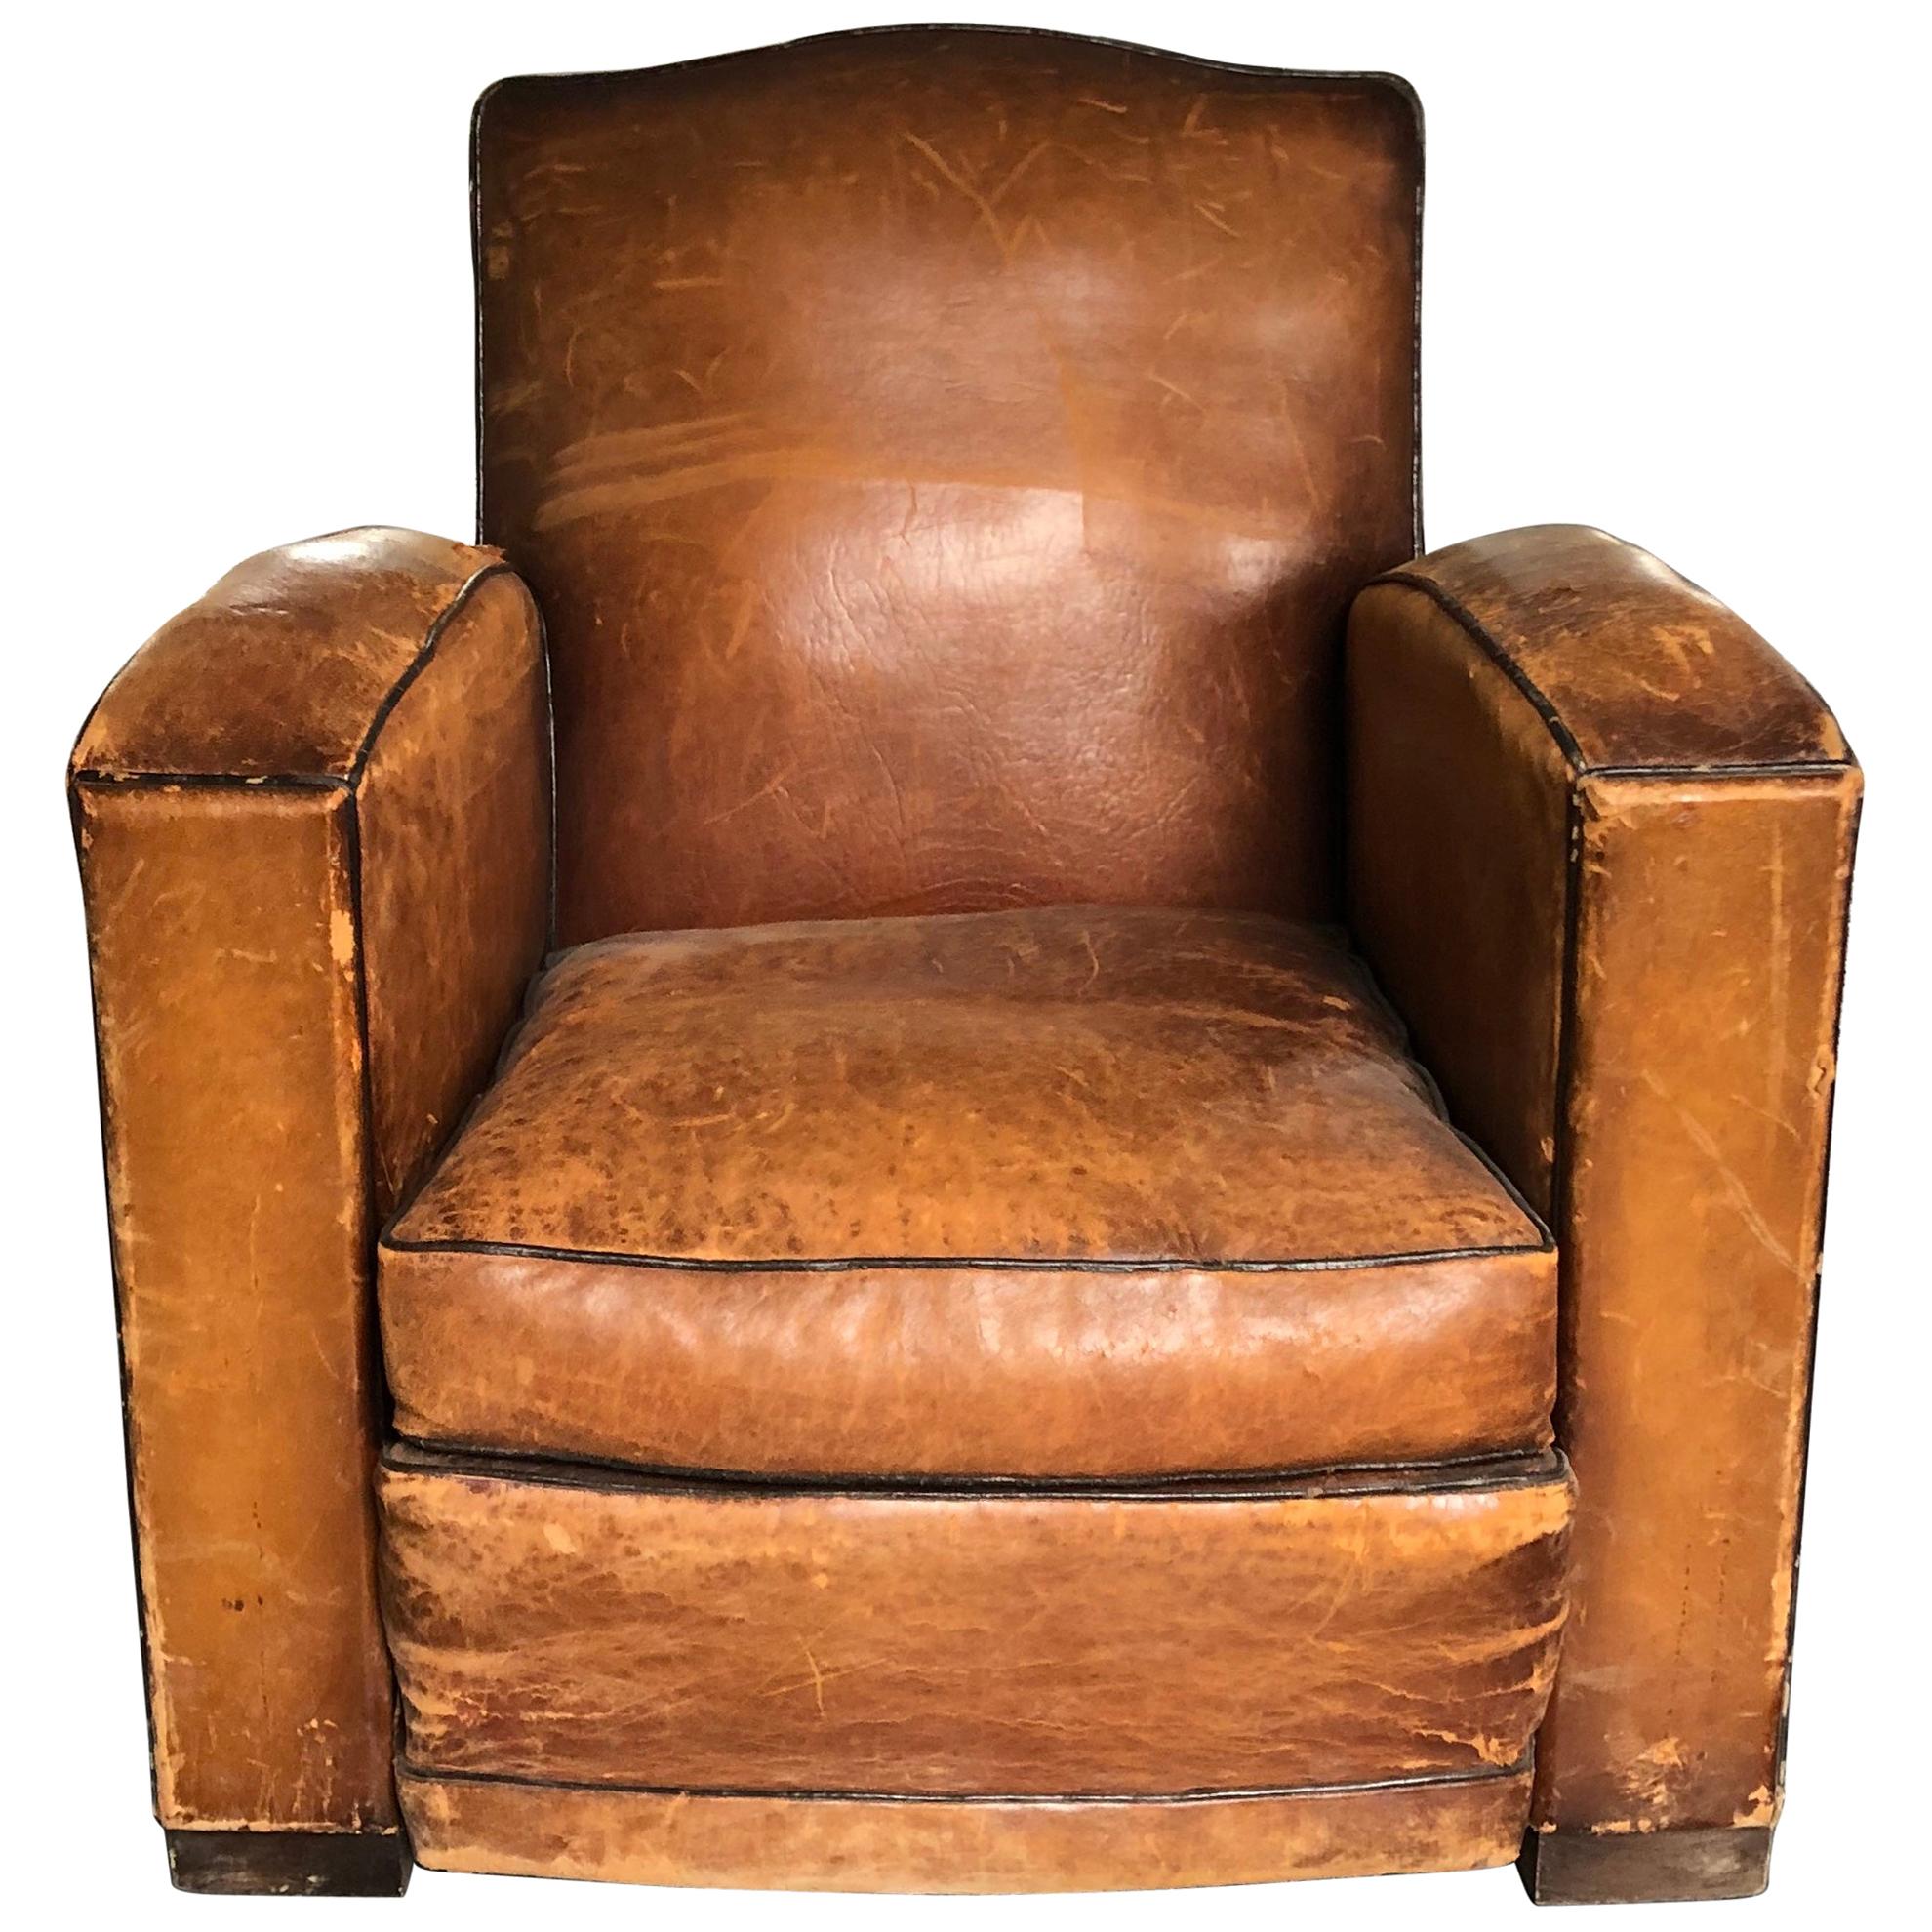 Vintage Leather Club Chair In Original Saddle Leather With Contrast Welting At 1stdibs